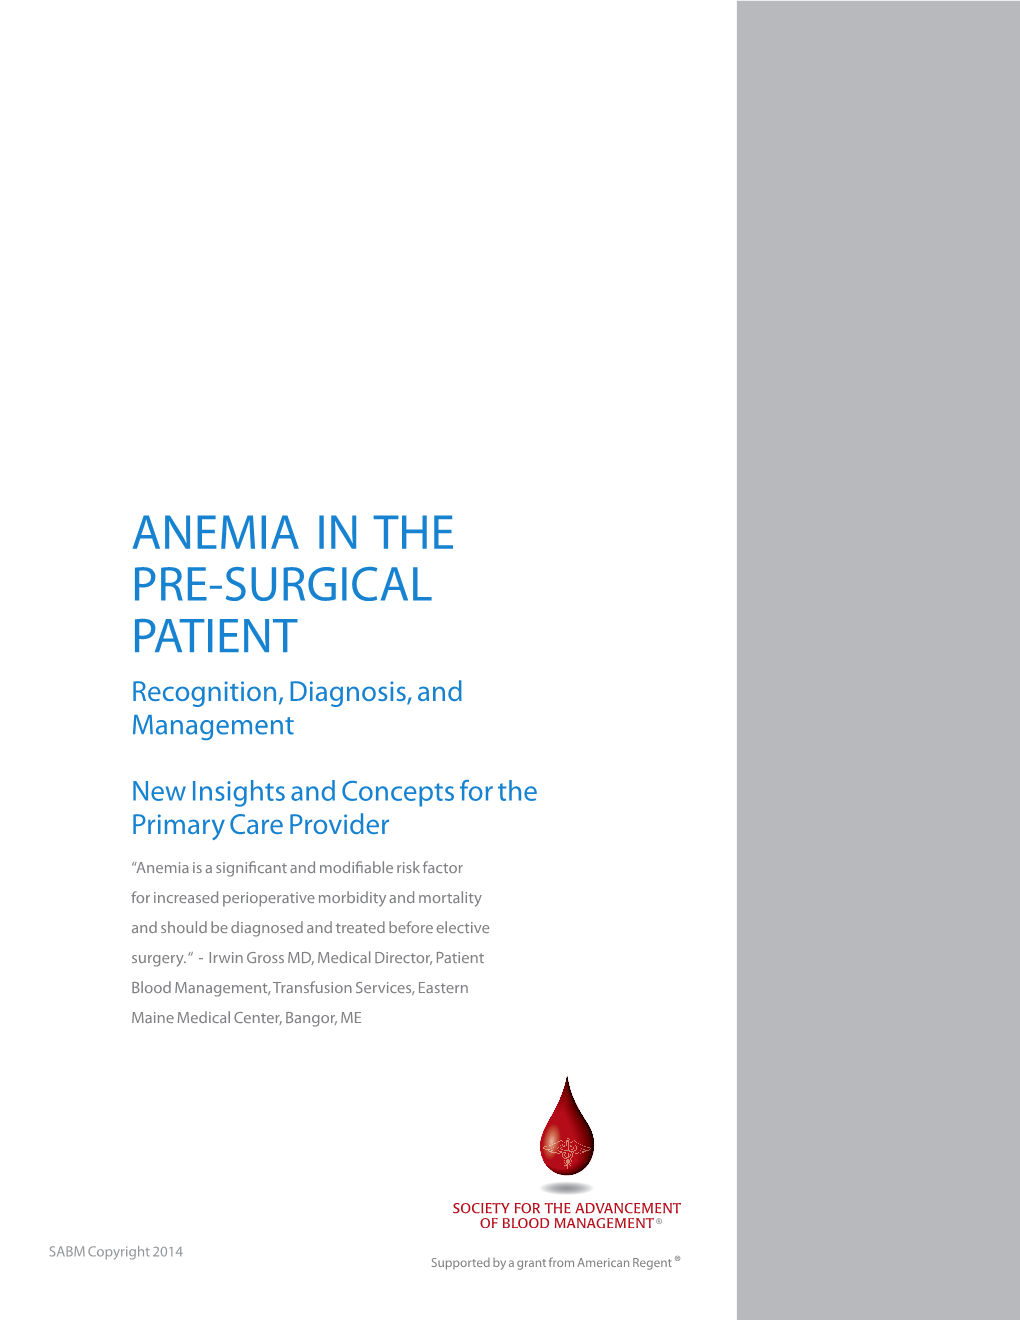 ANEMIA in the PRE-SURGICAL PATIENT Recognition, Diagnosis, and Management